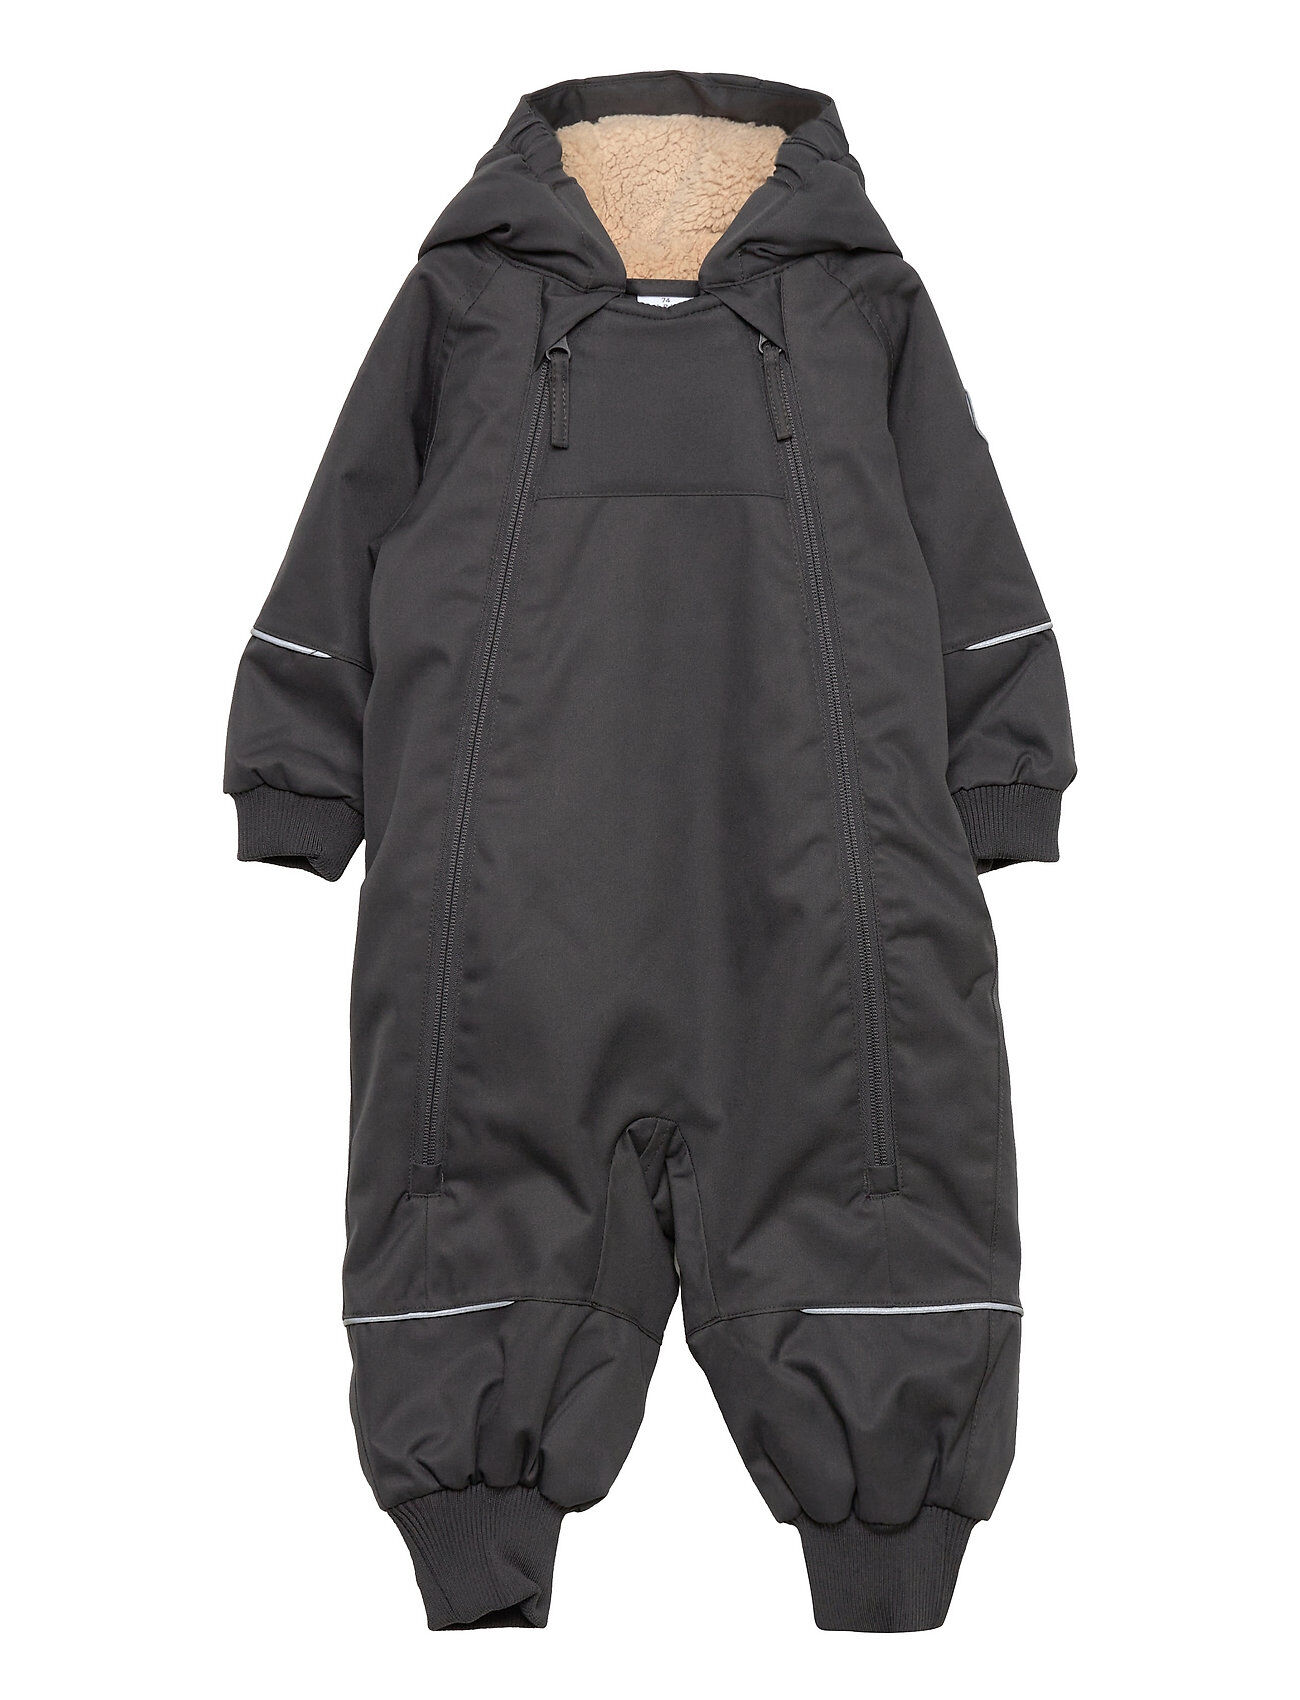 Polarn O. Pyret Overall Shell Lined Baby Outerwear Coveralls Snow/ski Coveralls & Sets Grå Polarn O. Pyret